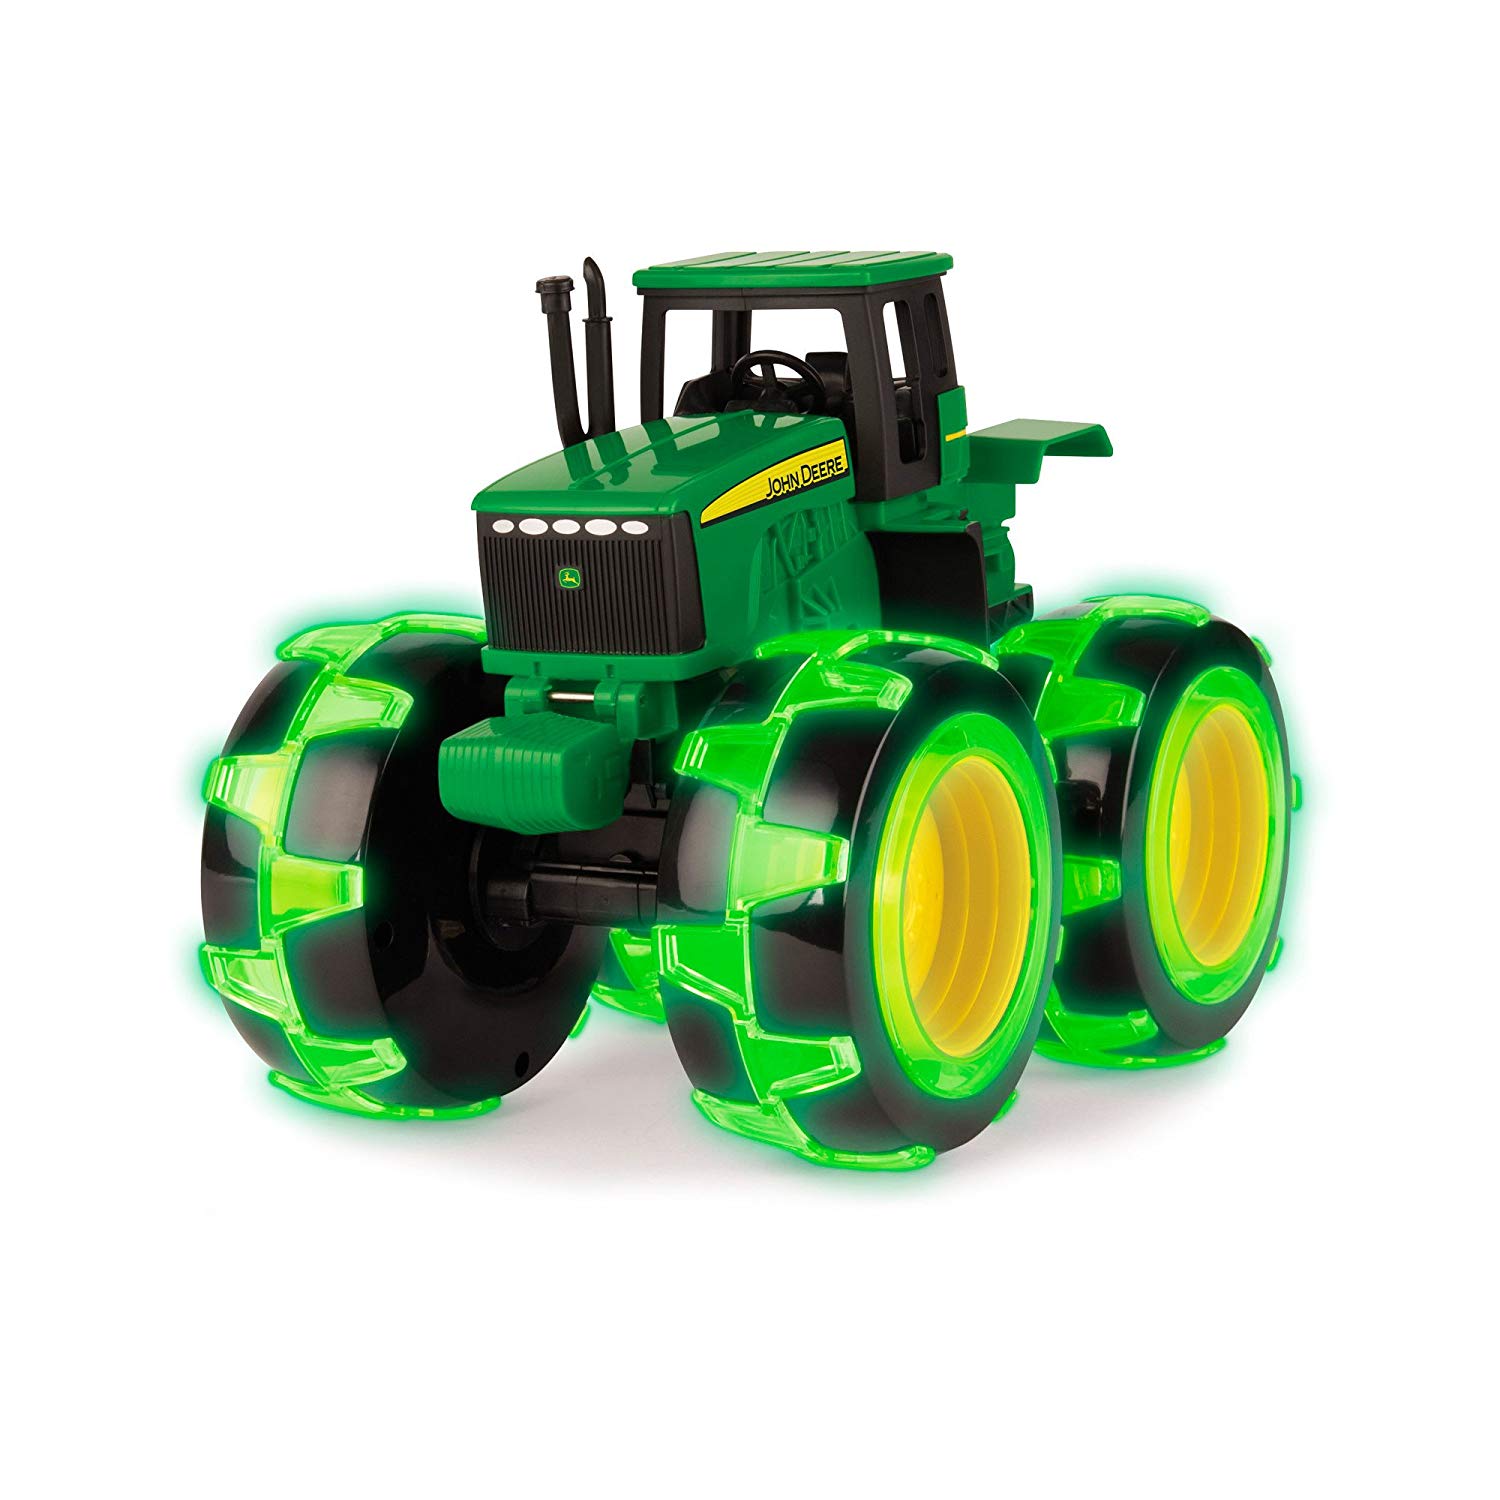 john deere toys for 1 year old